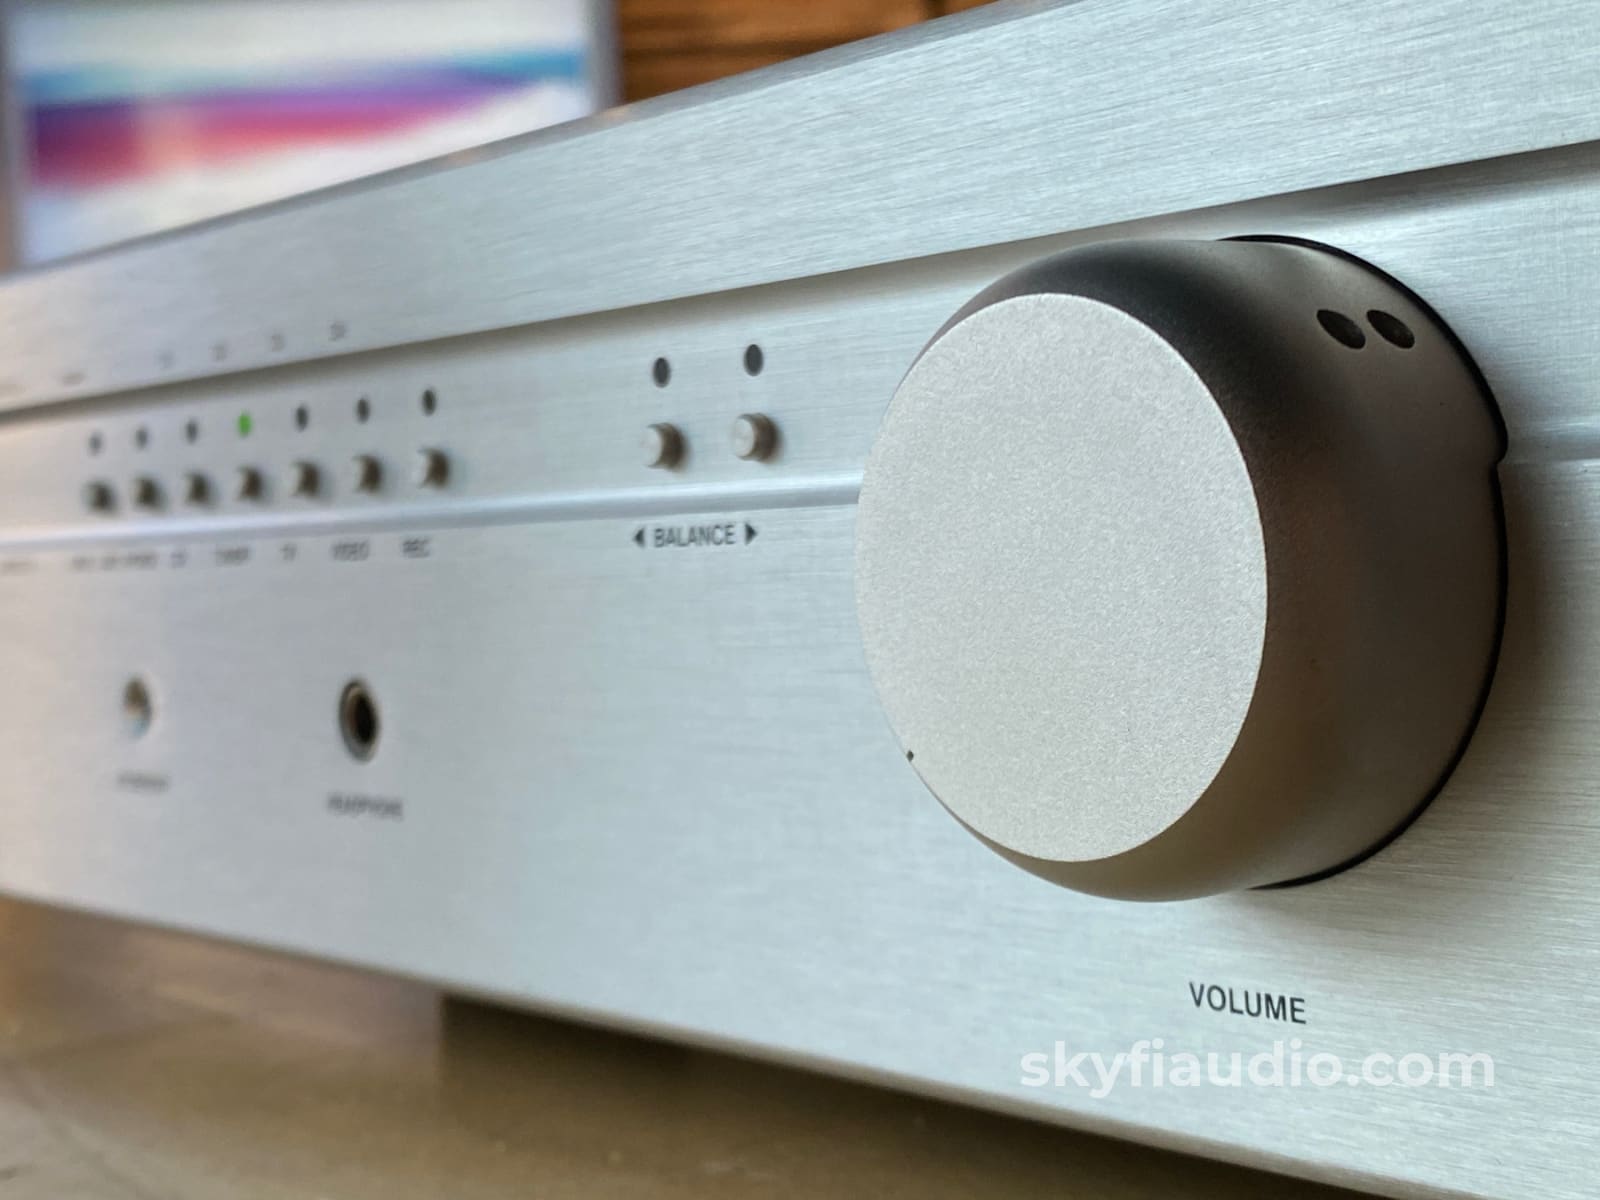 Bryston B100-Sst Solid State Integrated Amplifier